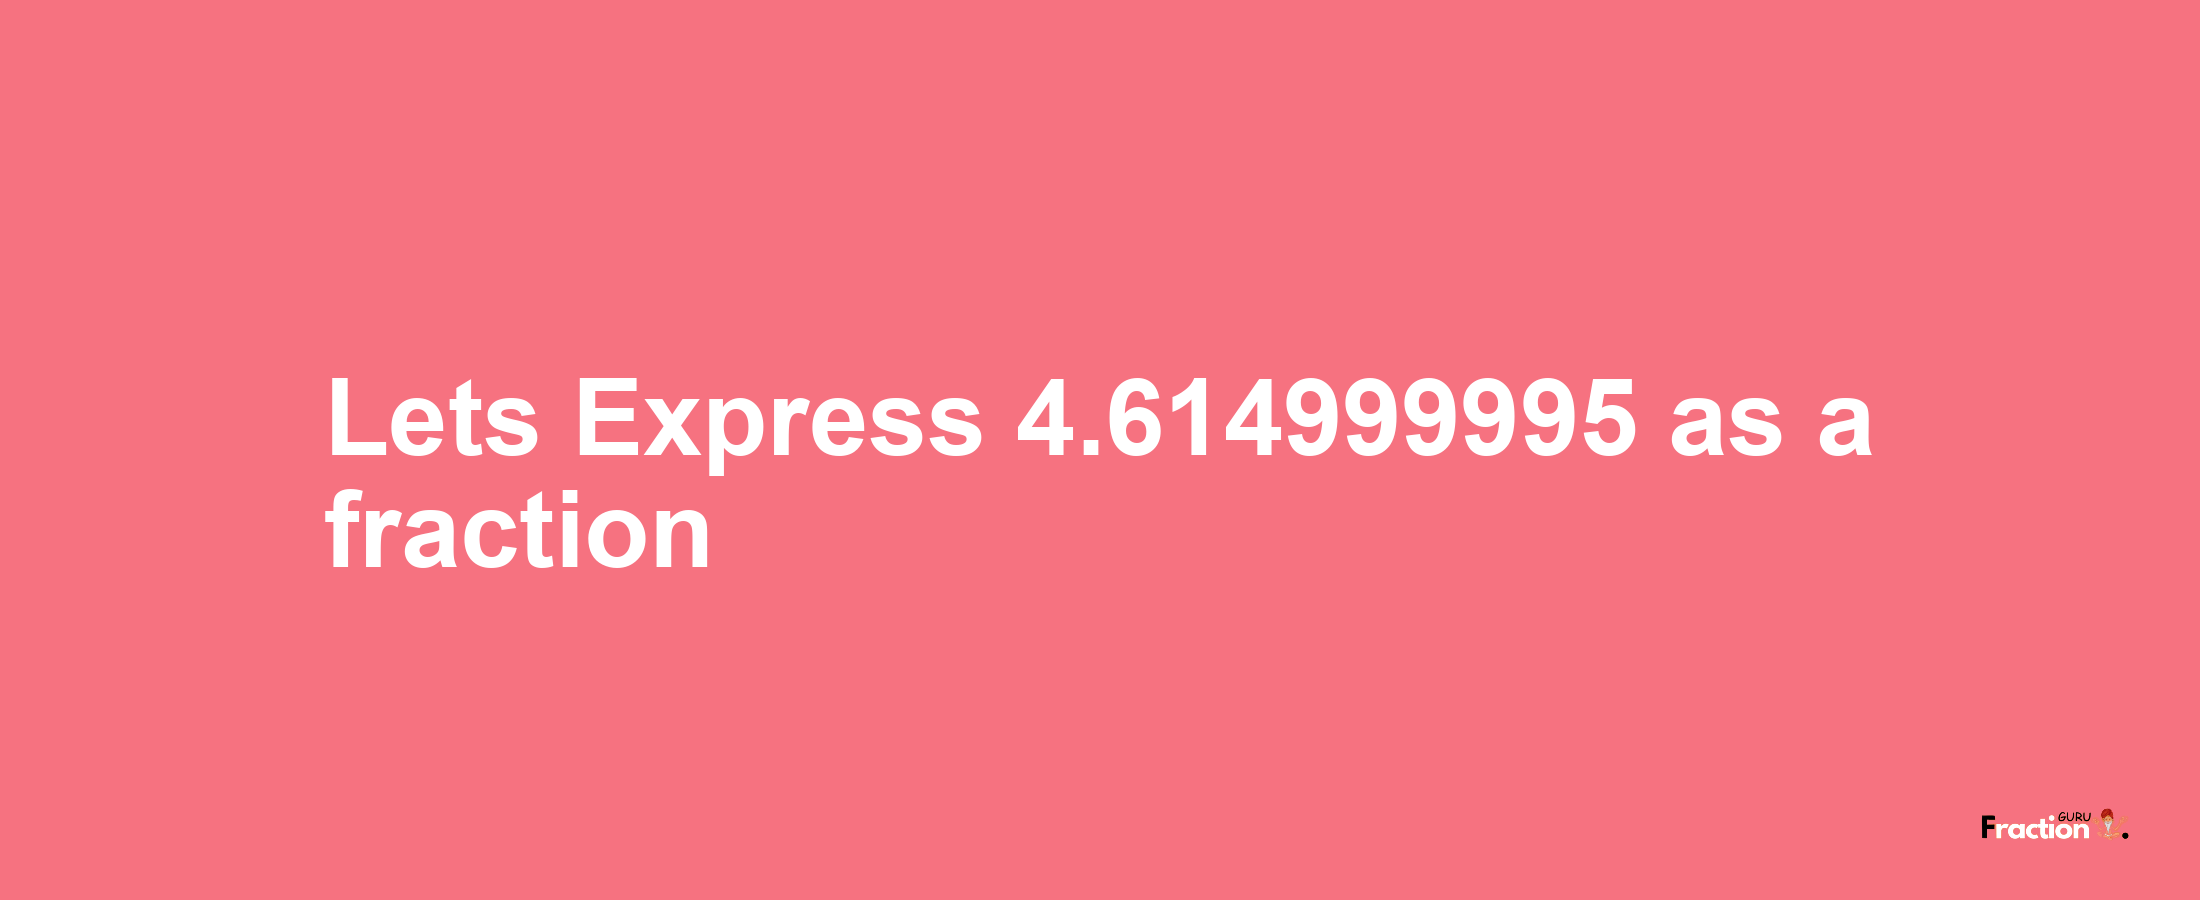 Lets Express 4.614999995 as afraction